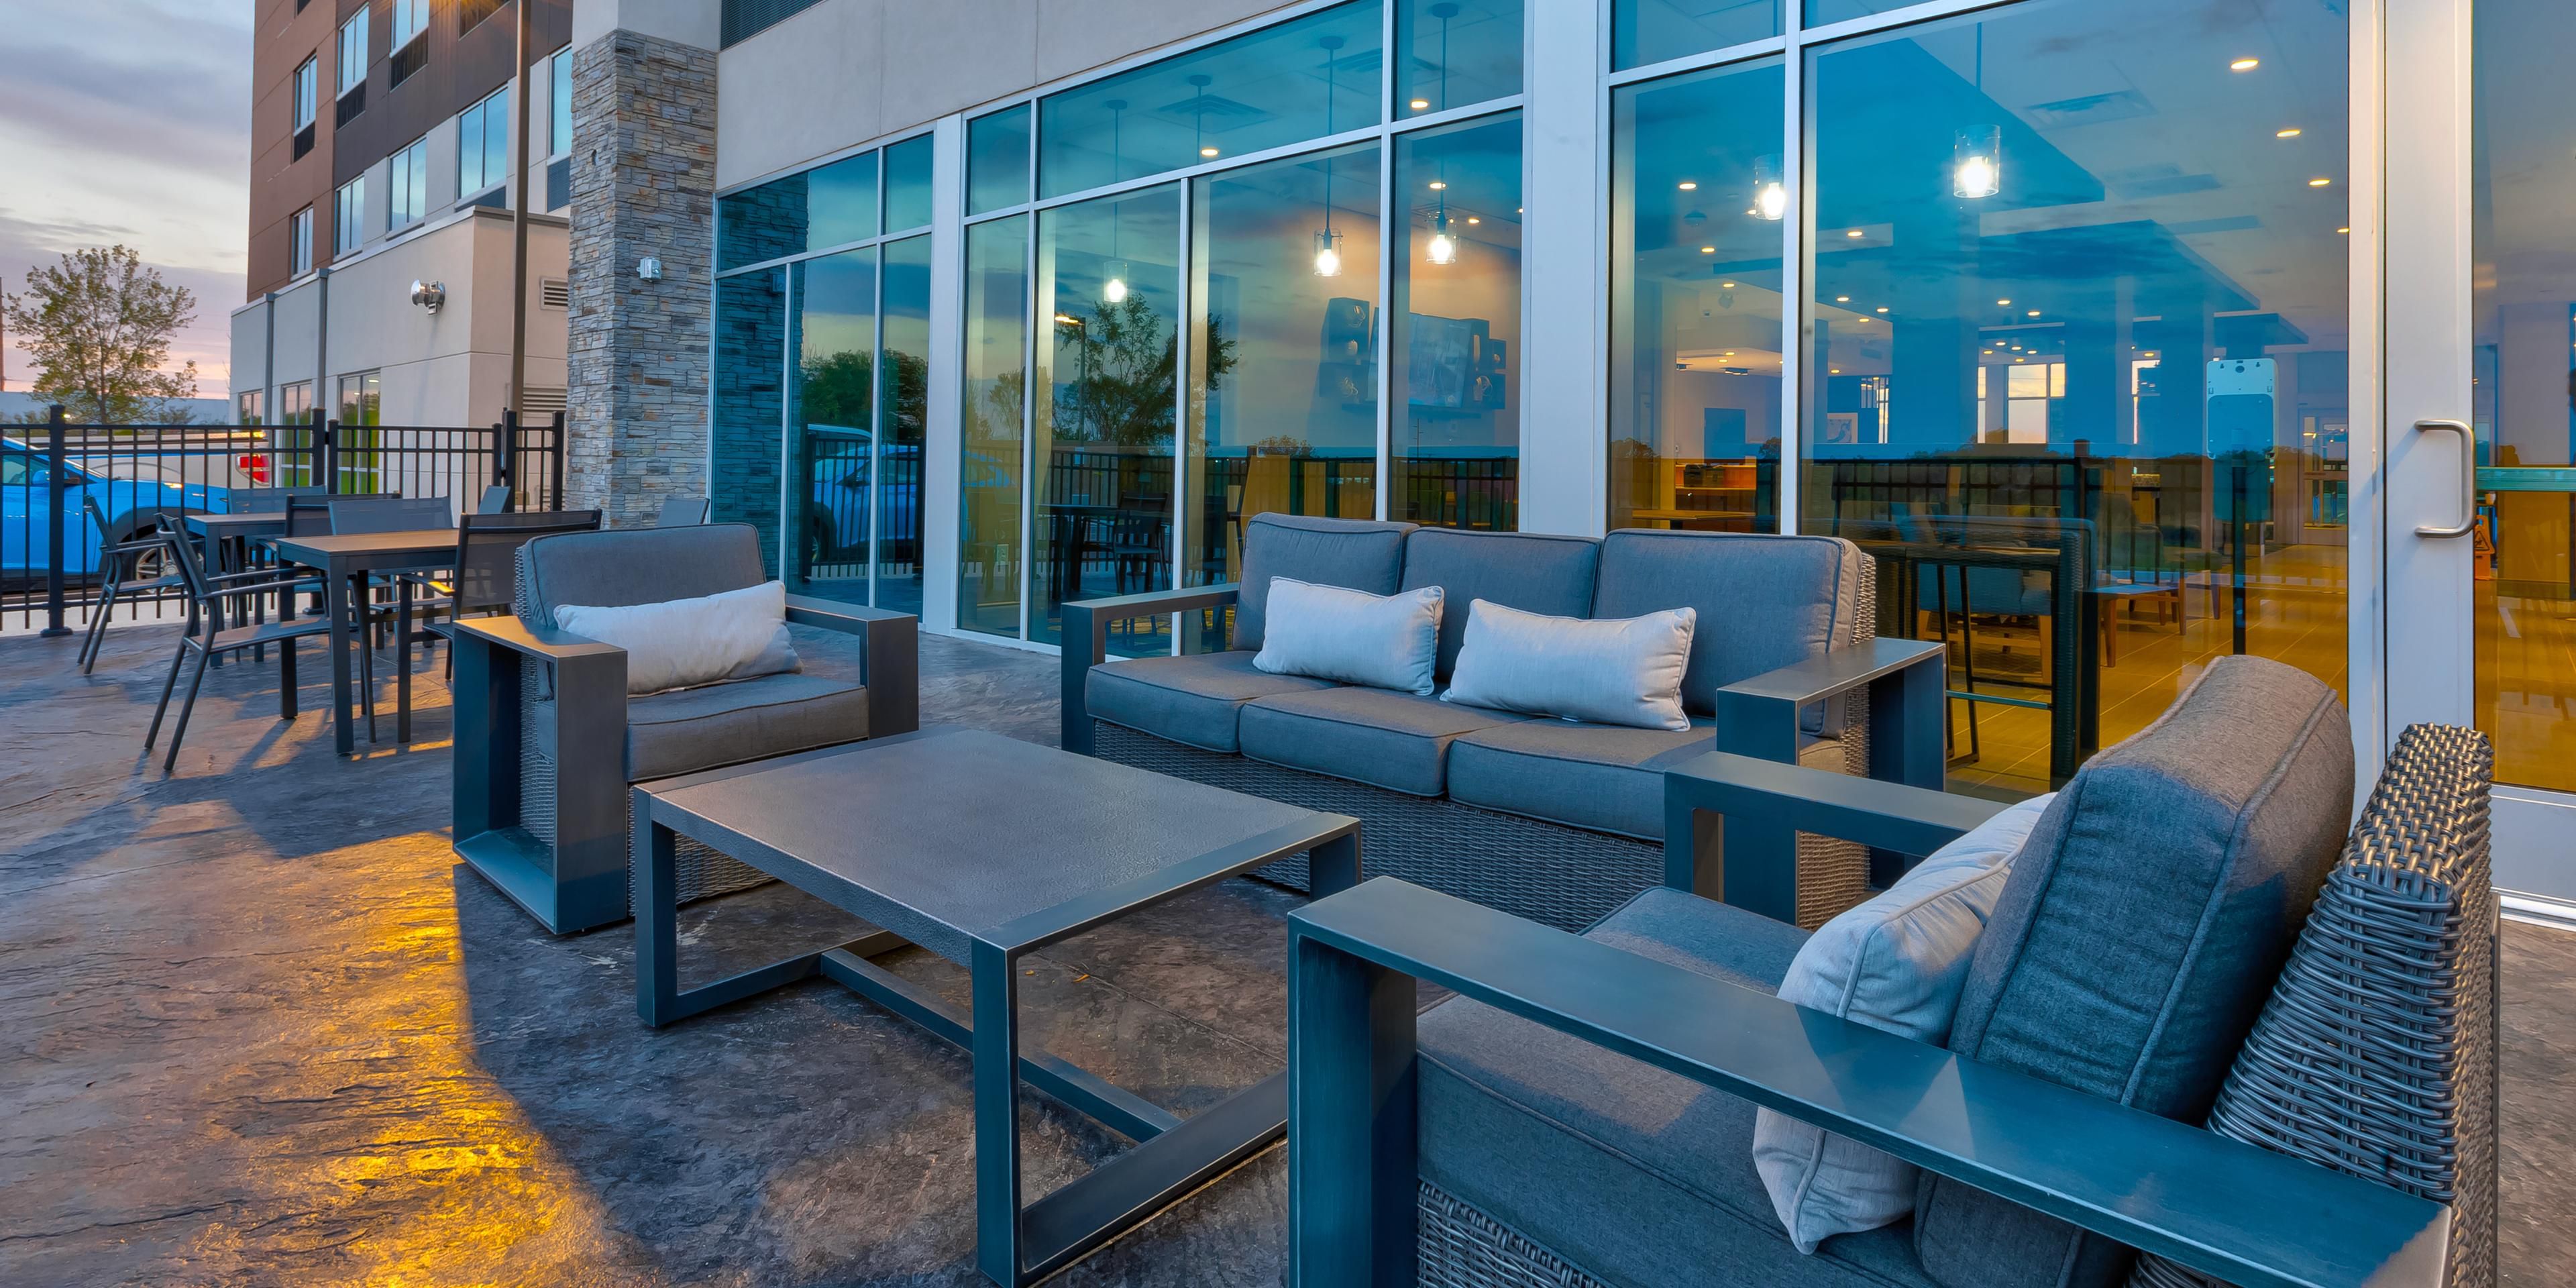 Relax, unwind and enjoy the view on the outdoor patio at the Holiday Inn Express Cedar Springs.